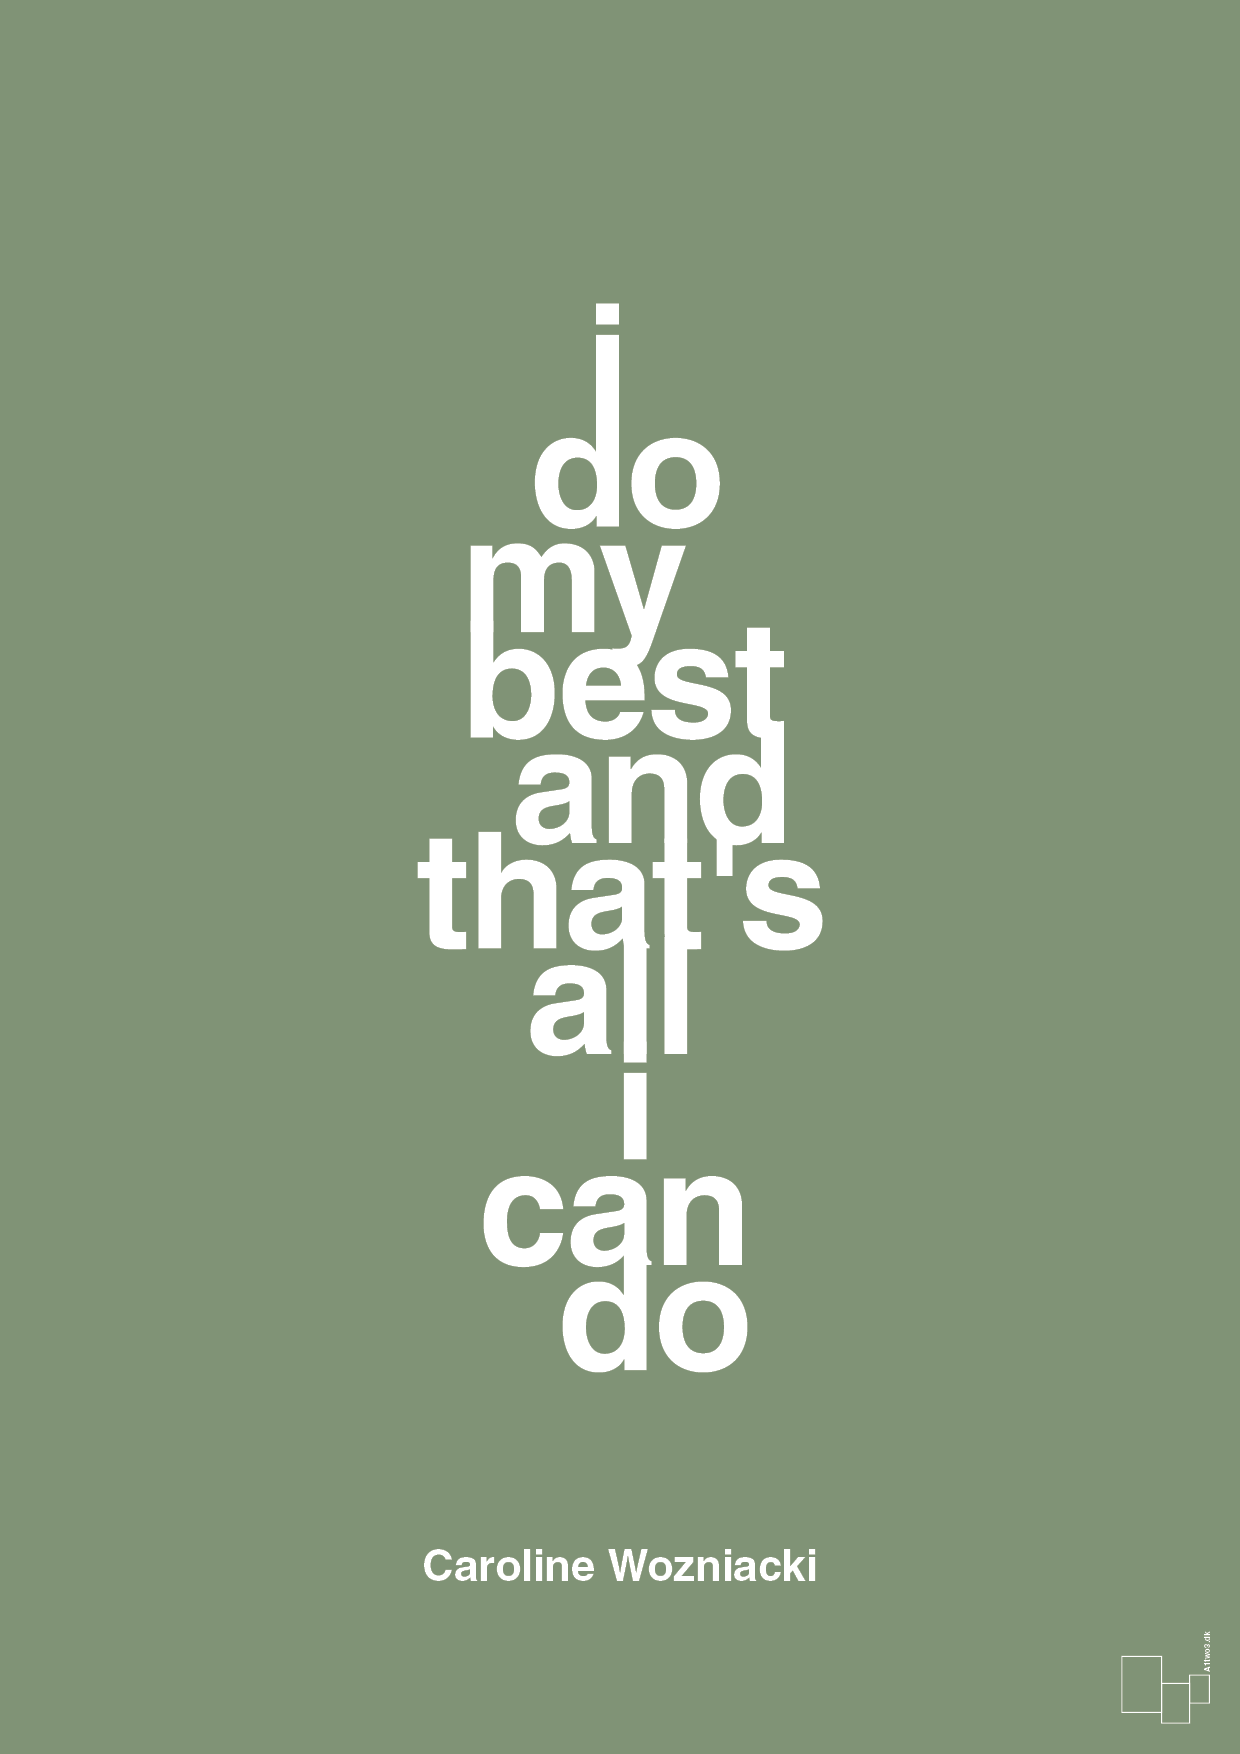 i do my best and that's all i can do - Plakat med Citater i Jade